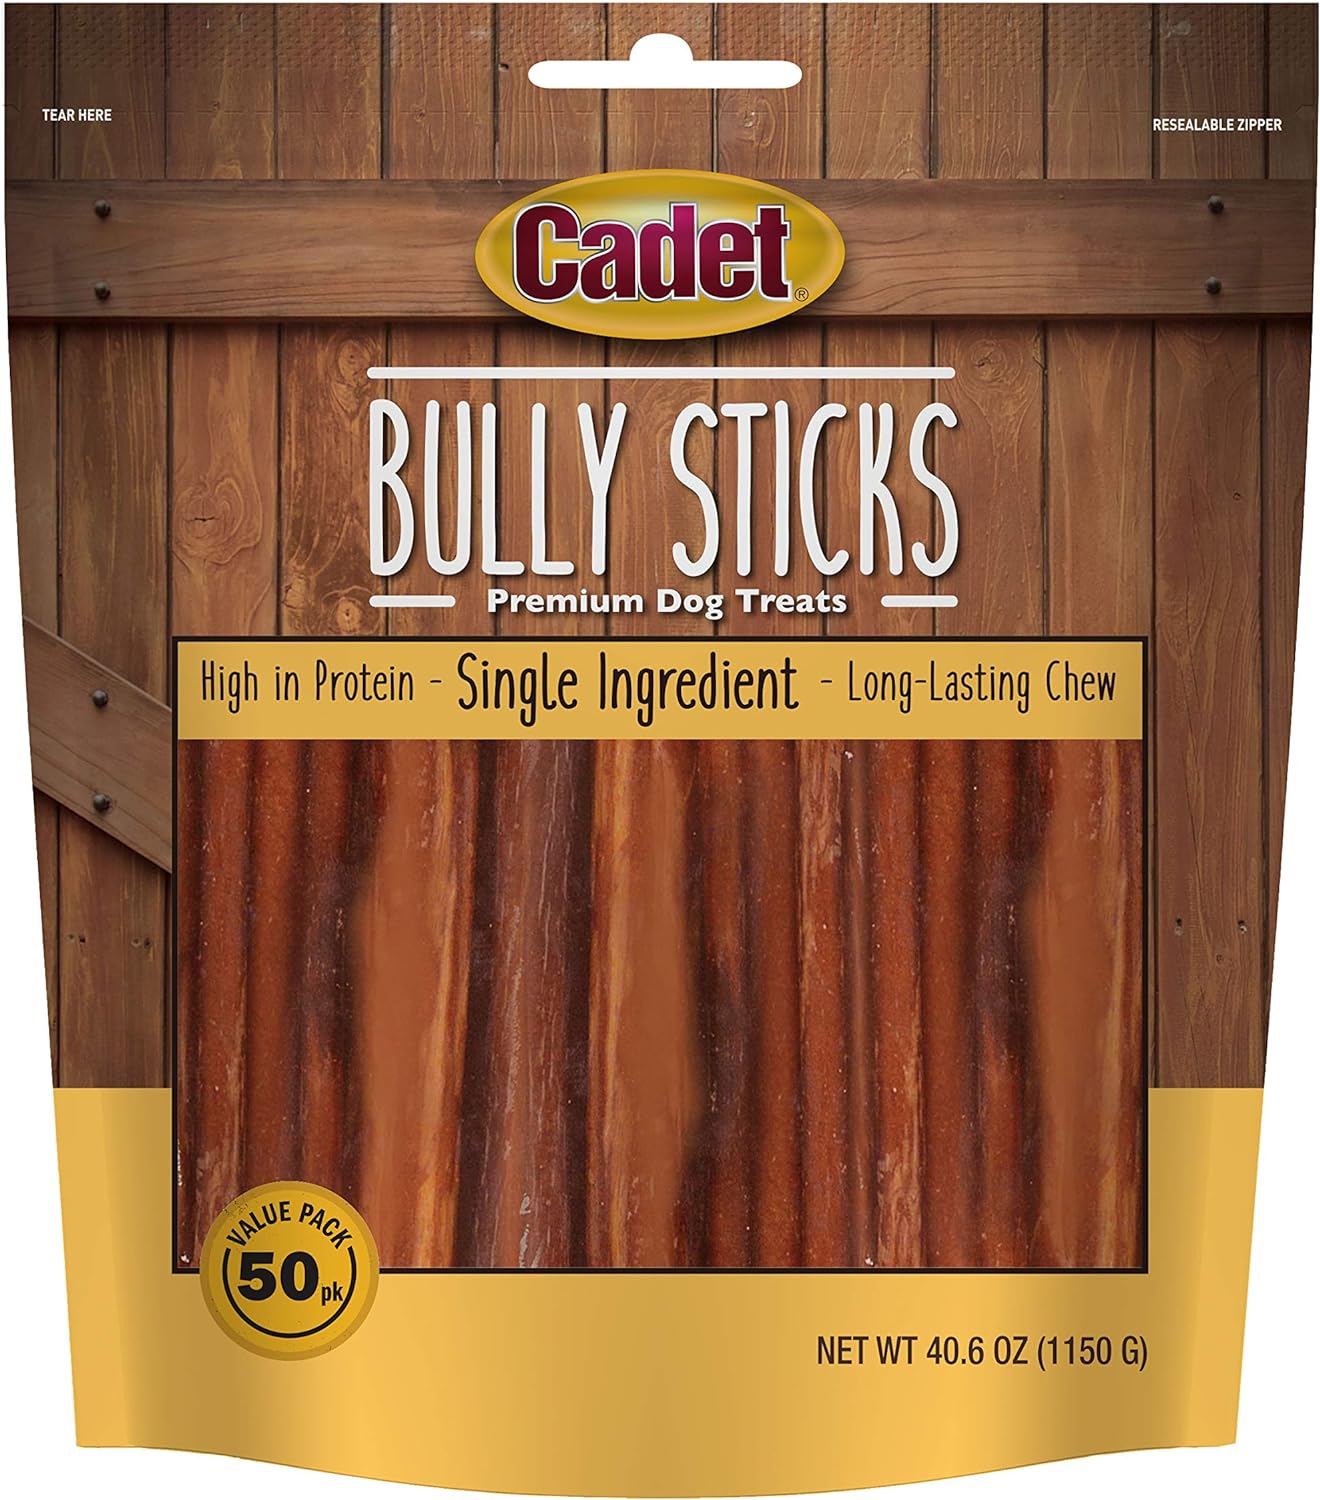 Cadet Bully Sticks for Small Dogs – All-Natural Beef Pizzle, High Protein, Low Fat, Long-Lasting, Grain & Rawhide-Free Dog Chews for Aggressive Chewers, Small (50 Count)